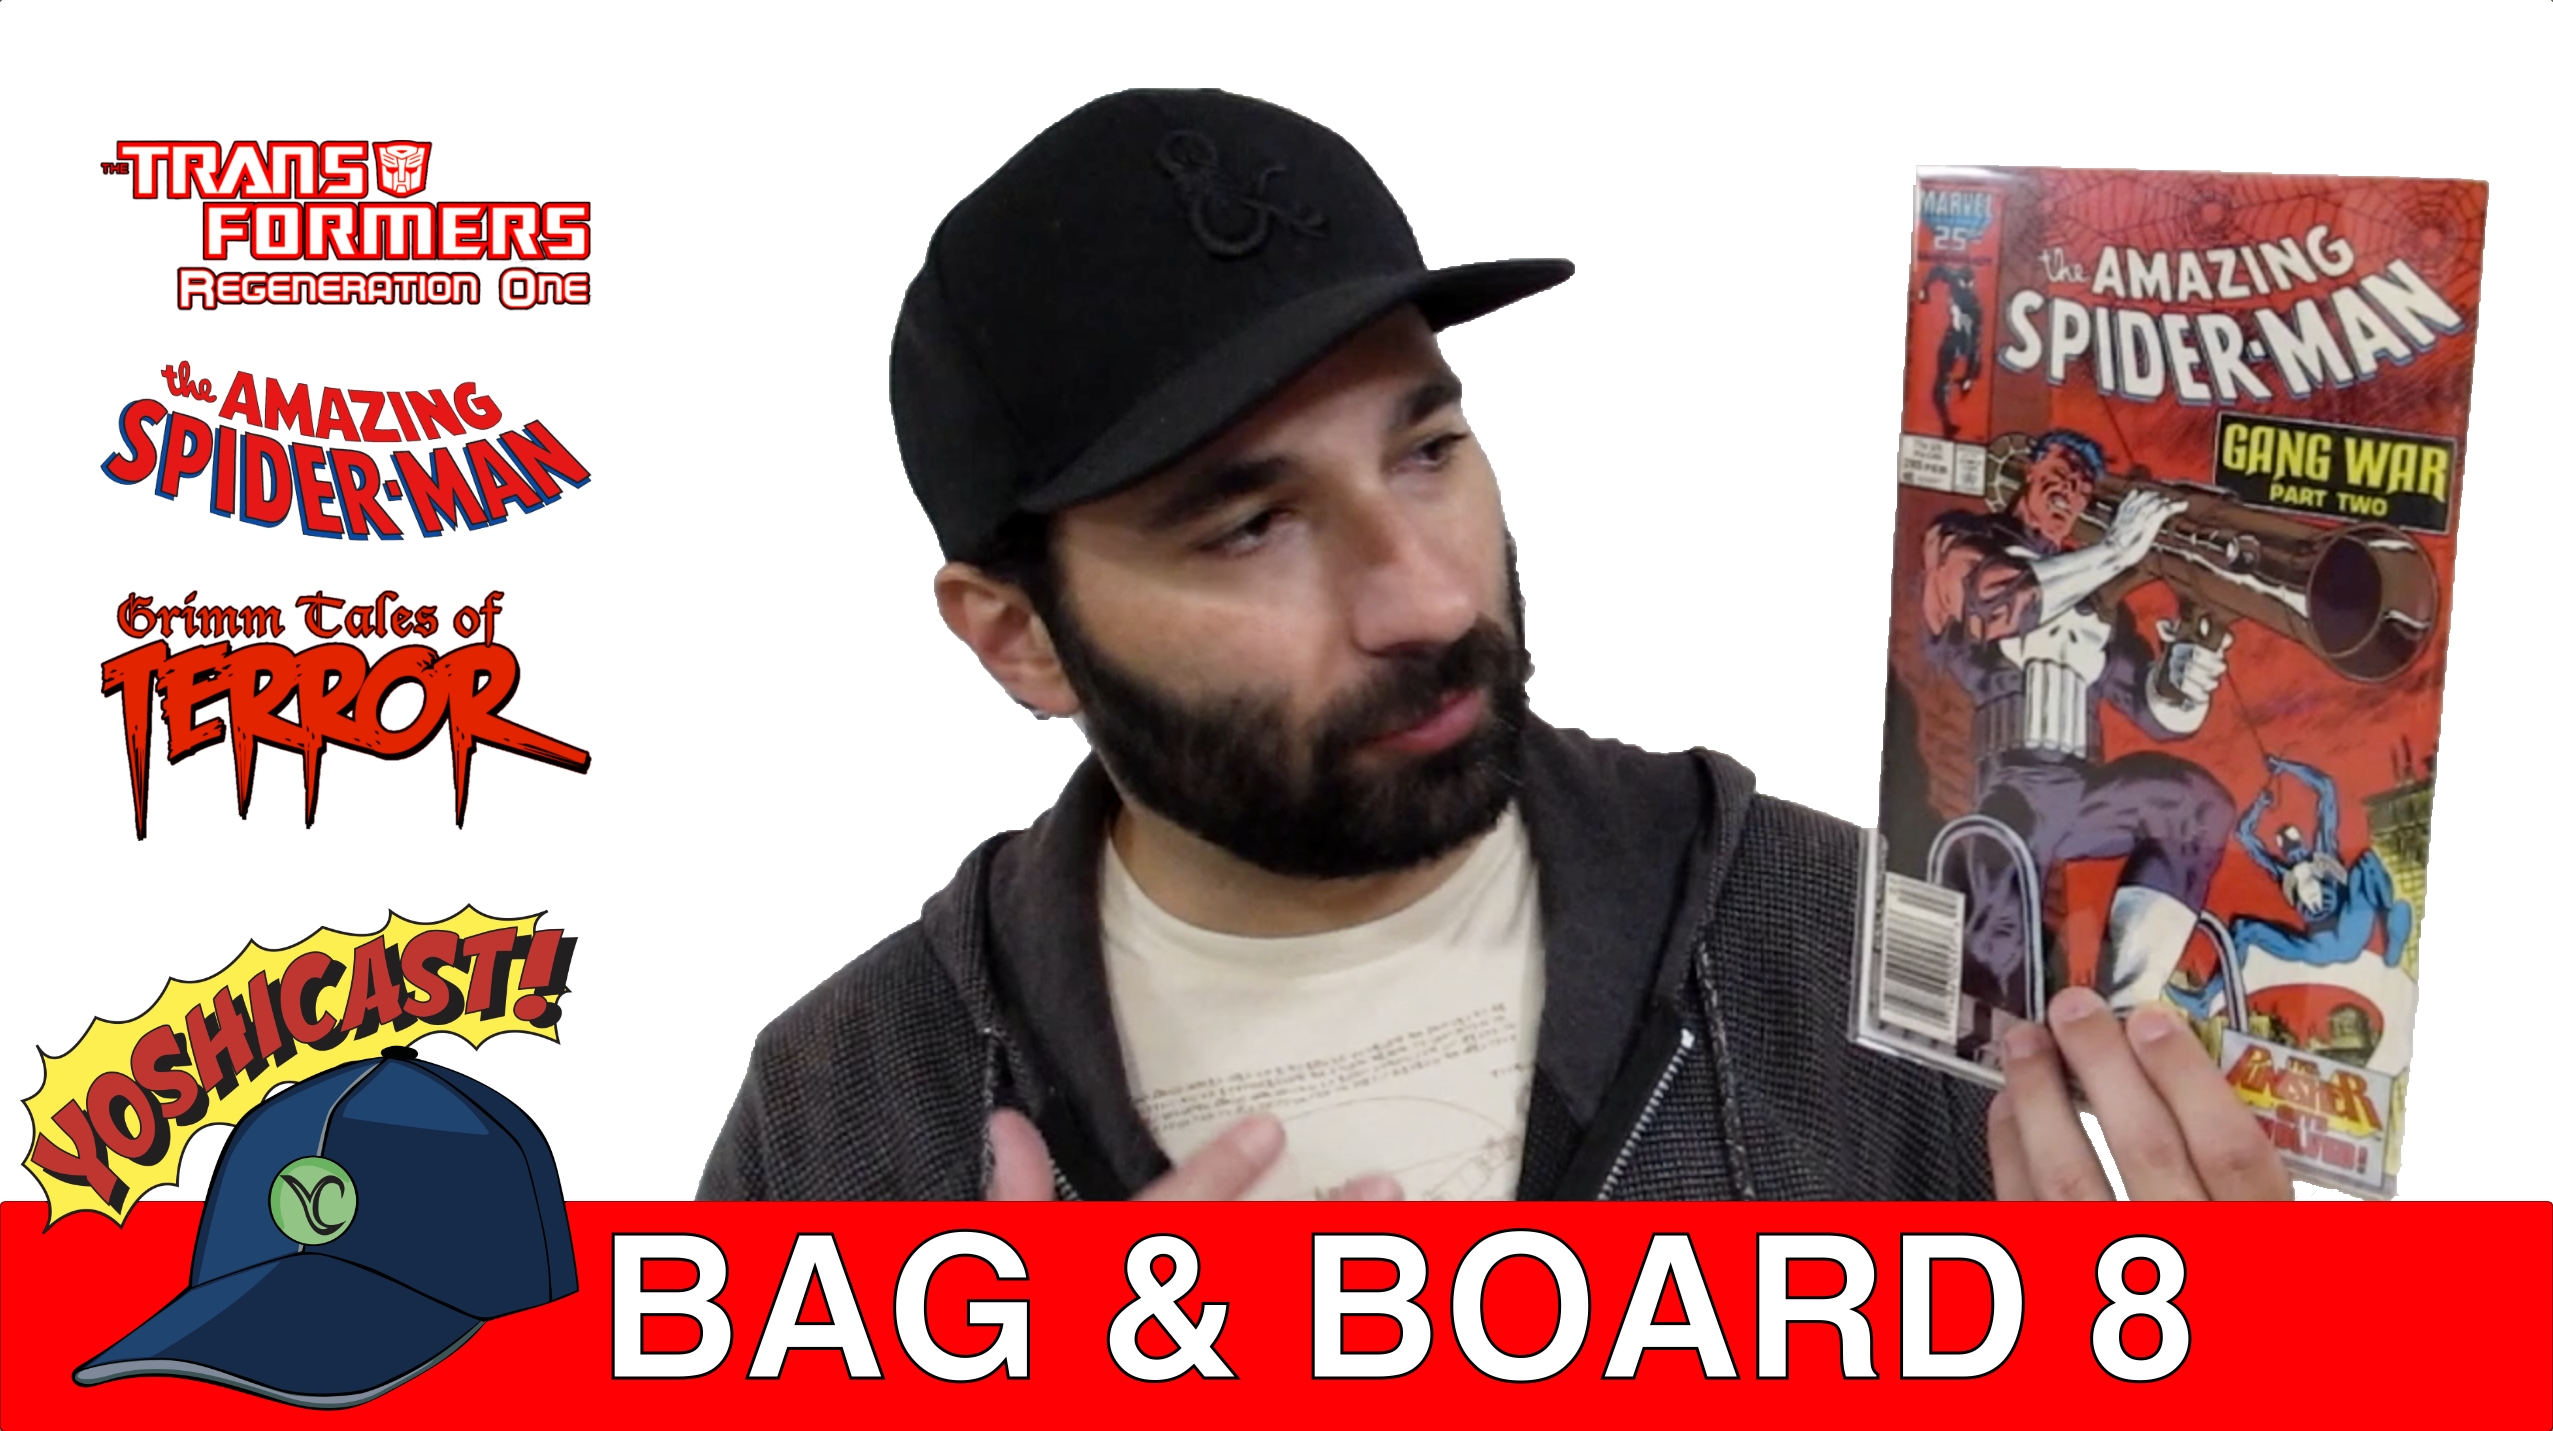 Bag & Board 8 | Transformers, The Amazing Spider-Man, Grimm Tales Of Terror